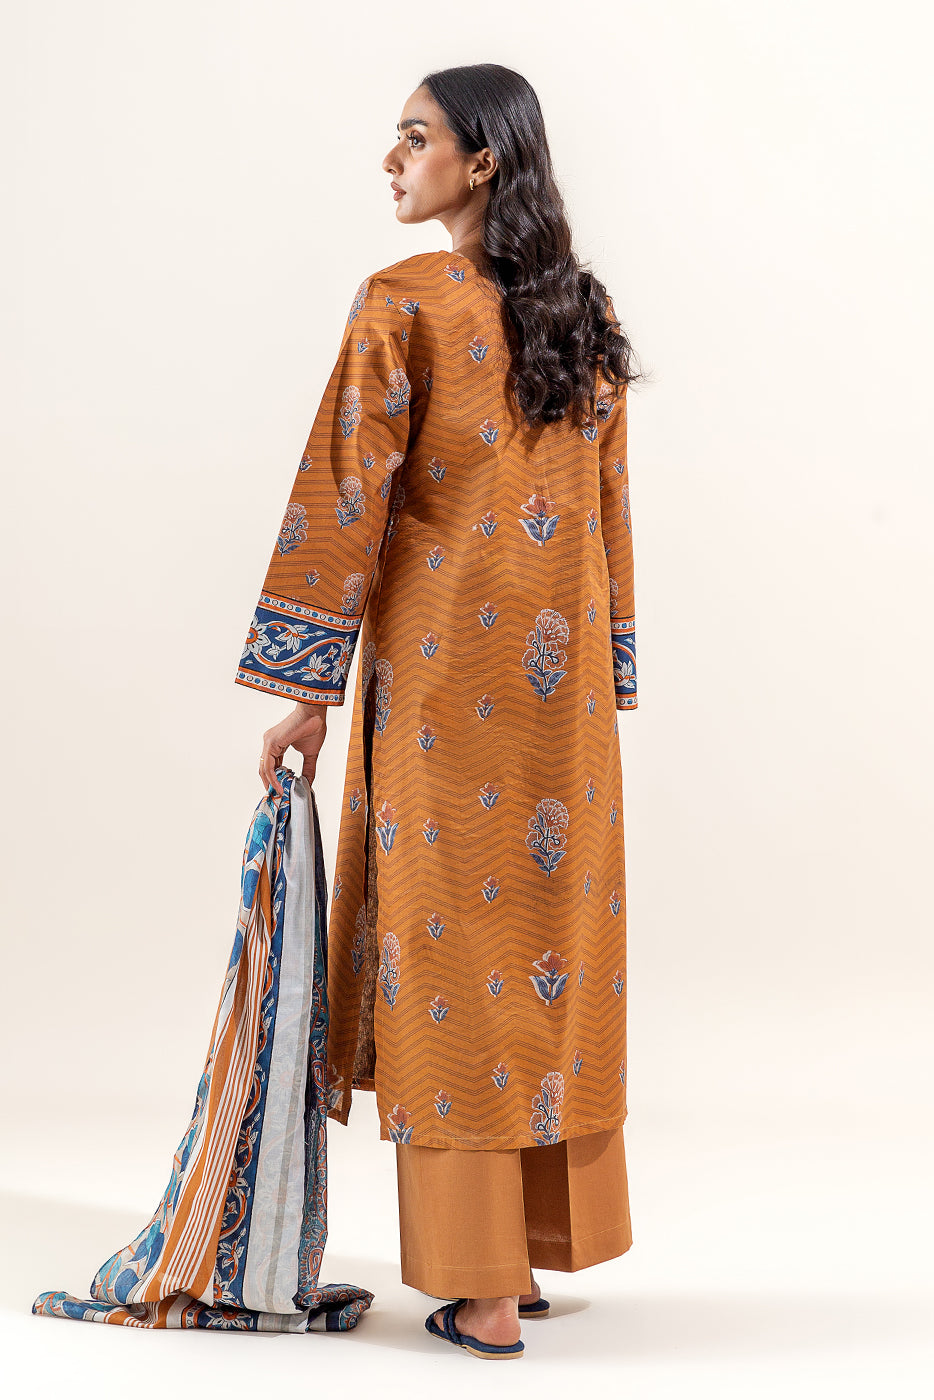 3 PIECE PRINTED LAWN SUIT-GOLDEN AMBER (UNSTITCHED)